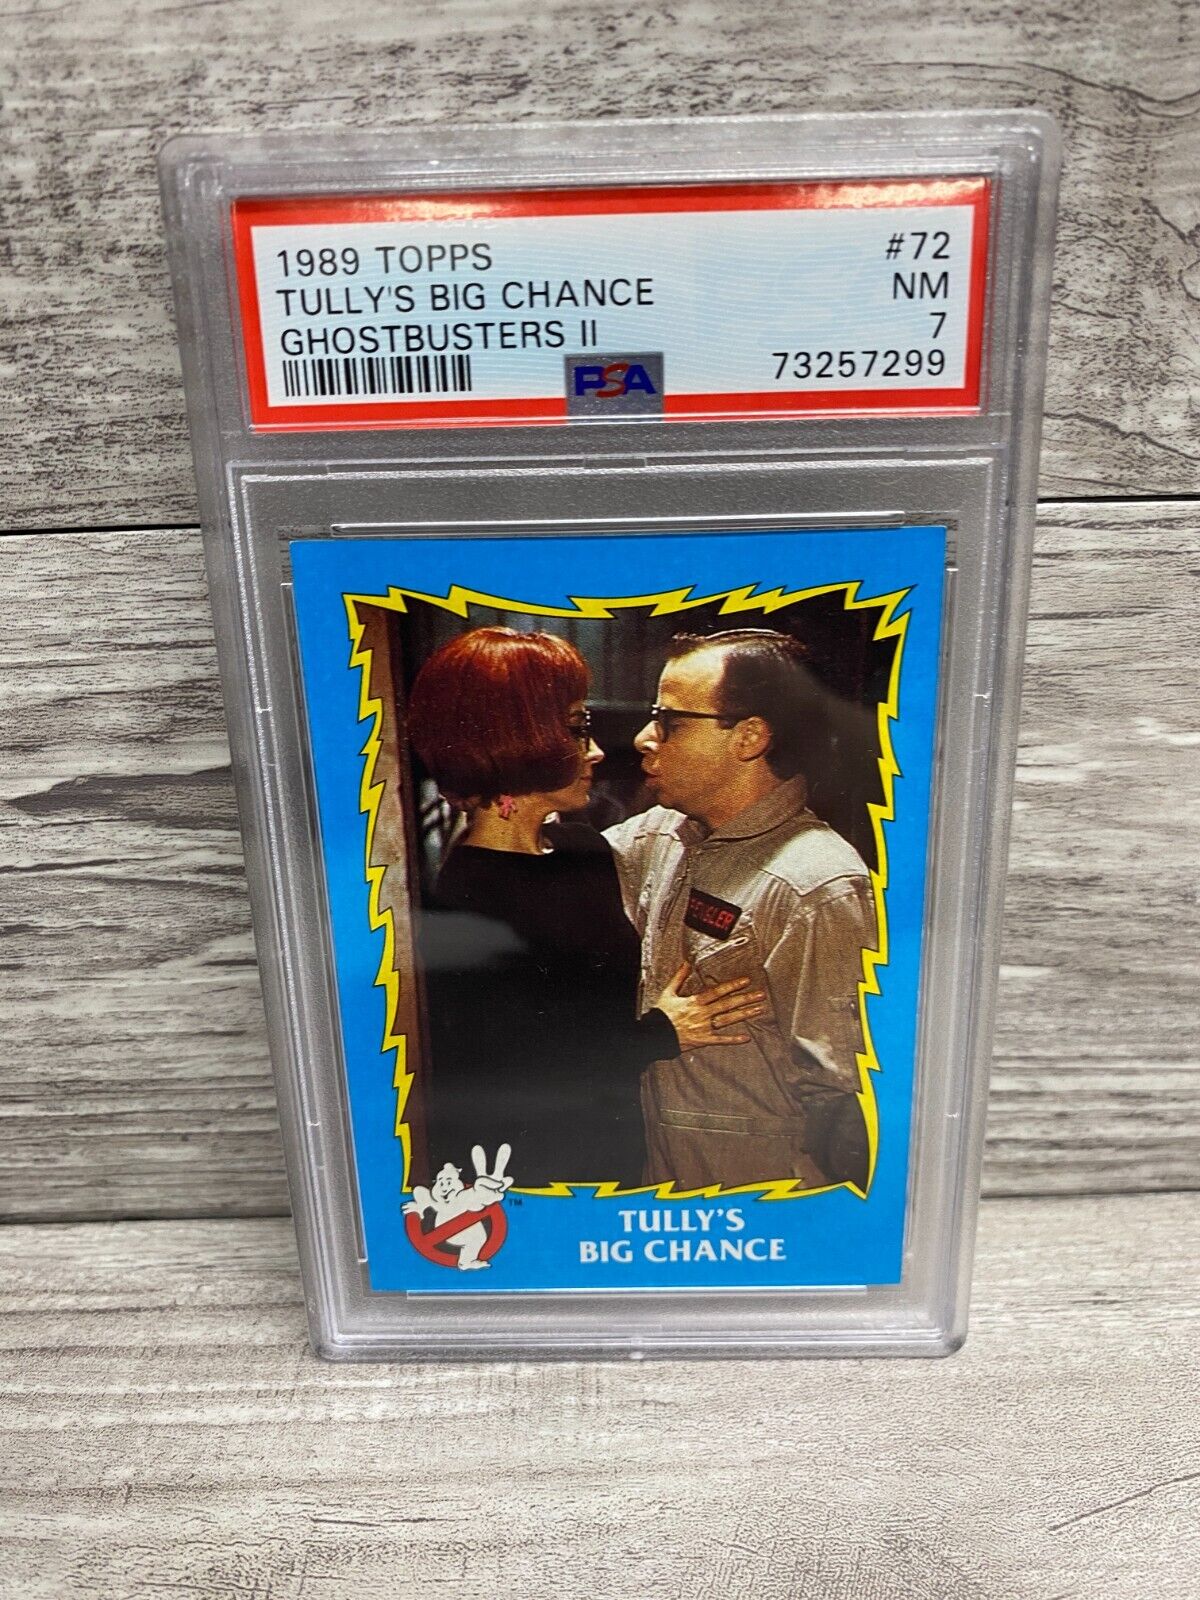 1989 TOPPS 2 GHOSTBUSTERS II #72 Tully's Big Chance PSA 7 NM